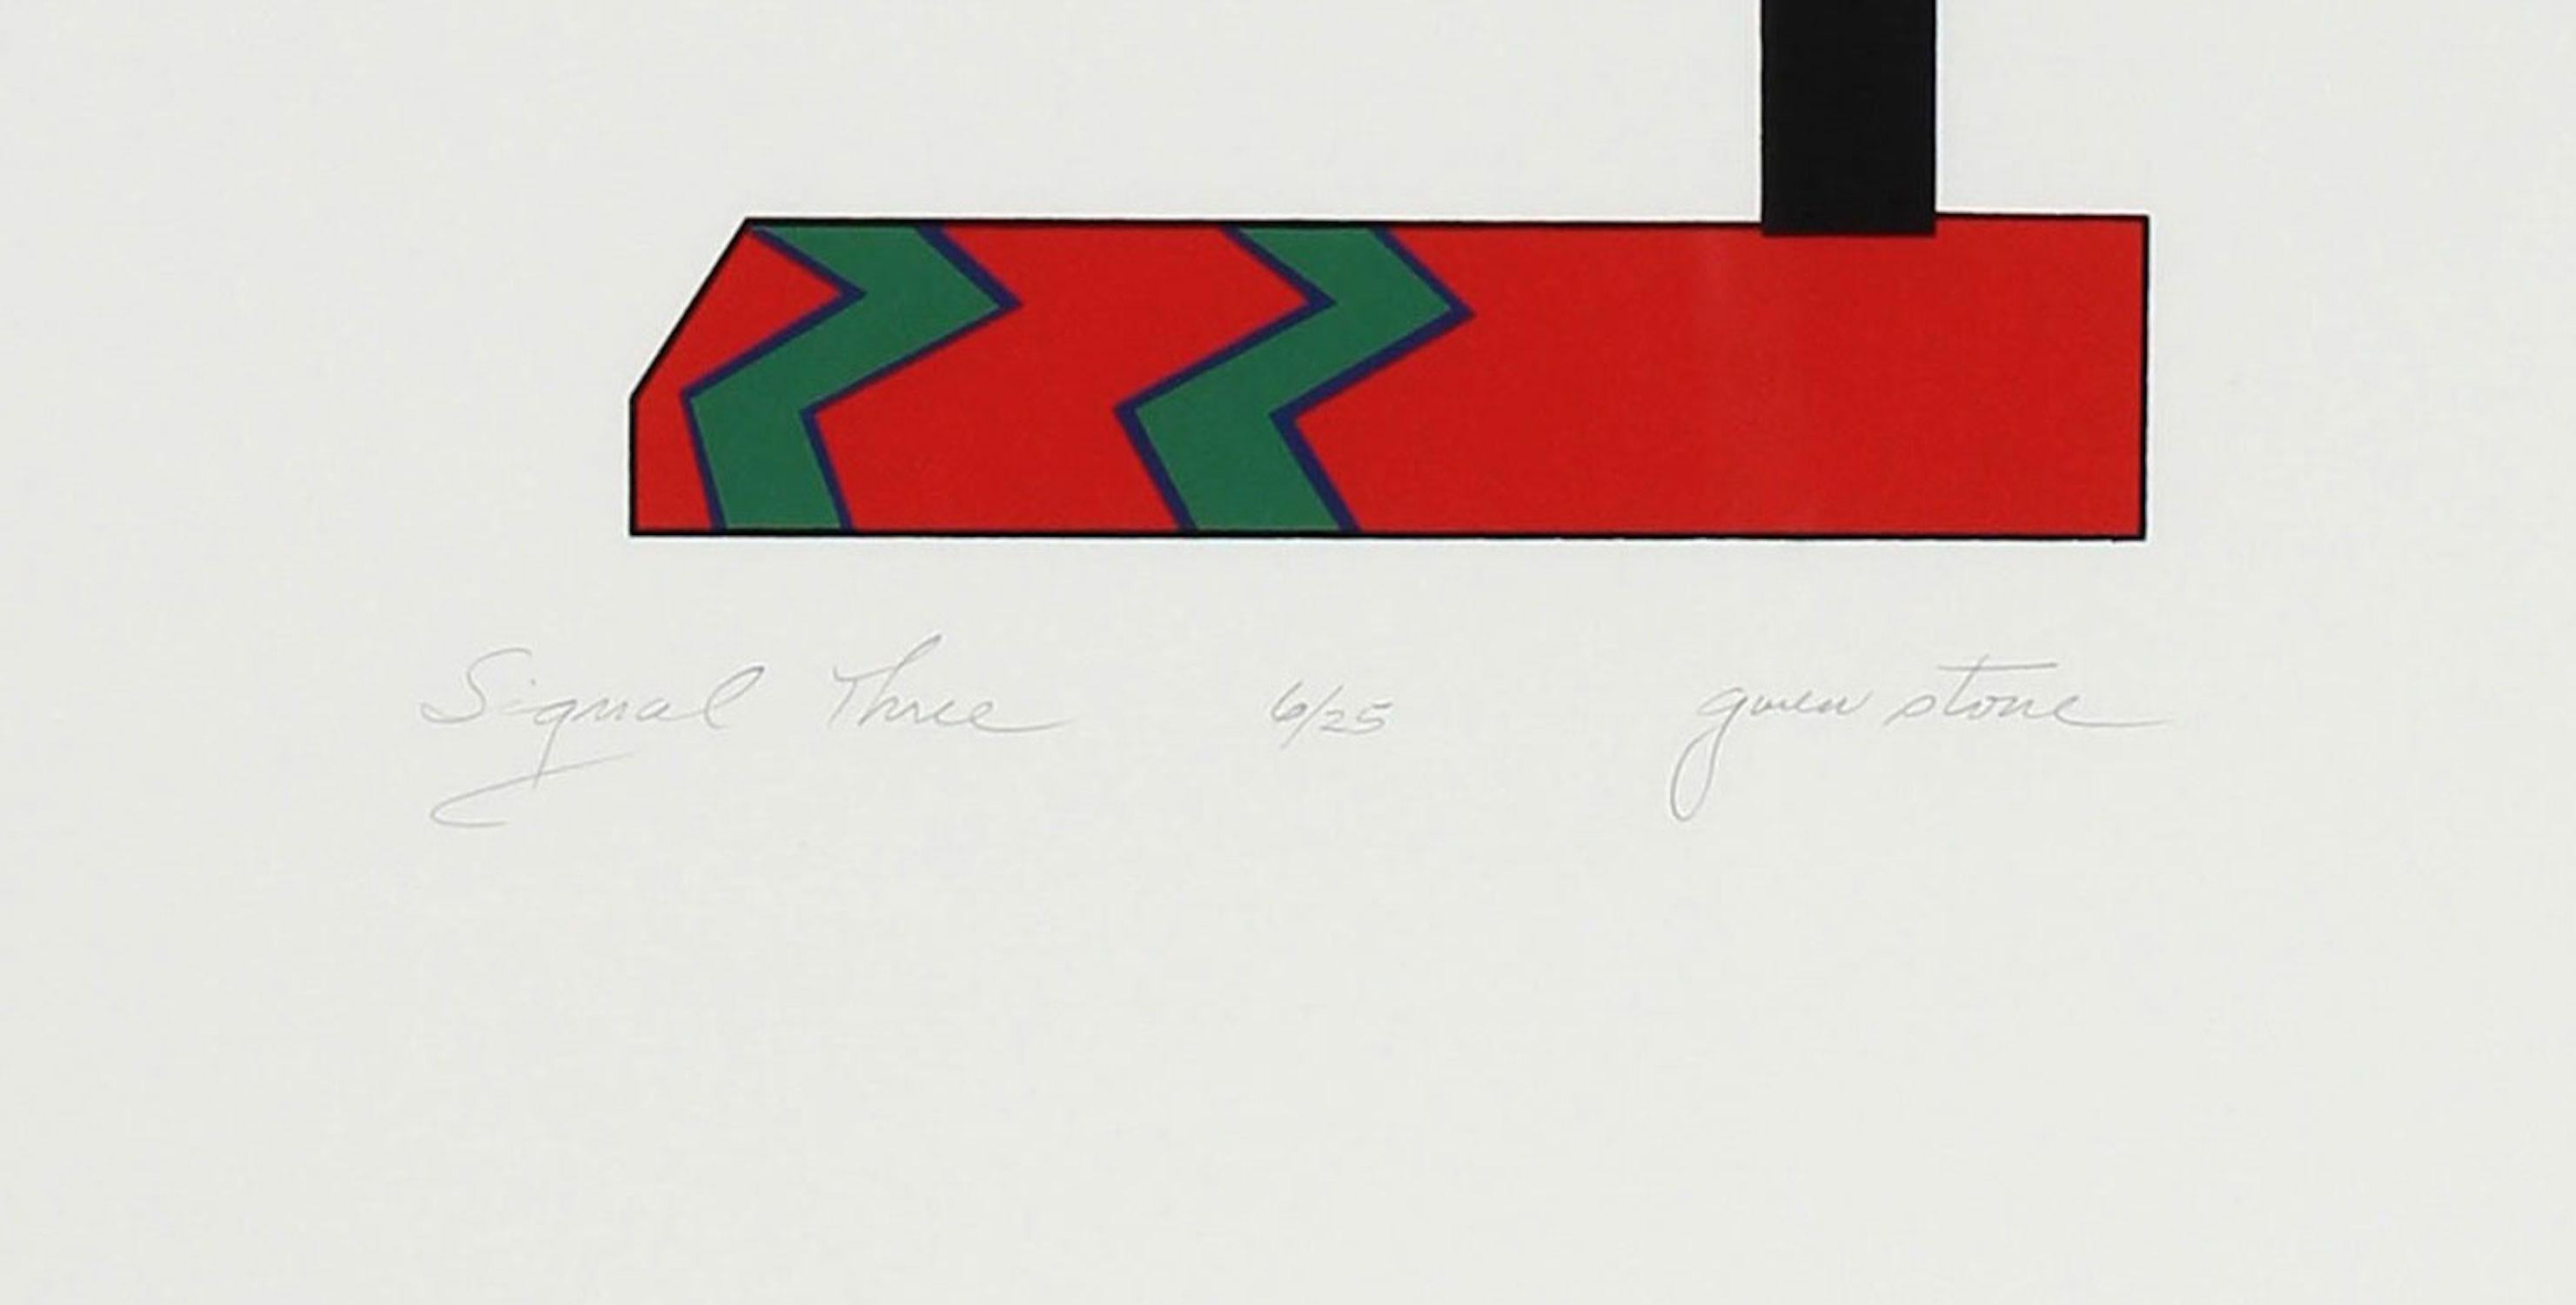 This late 20th century abstract serigraph on paper in red, green, black and white entitled 